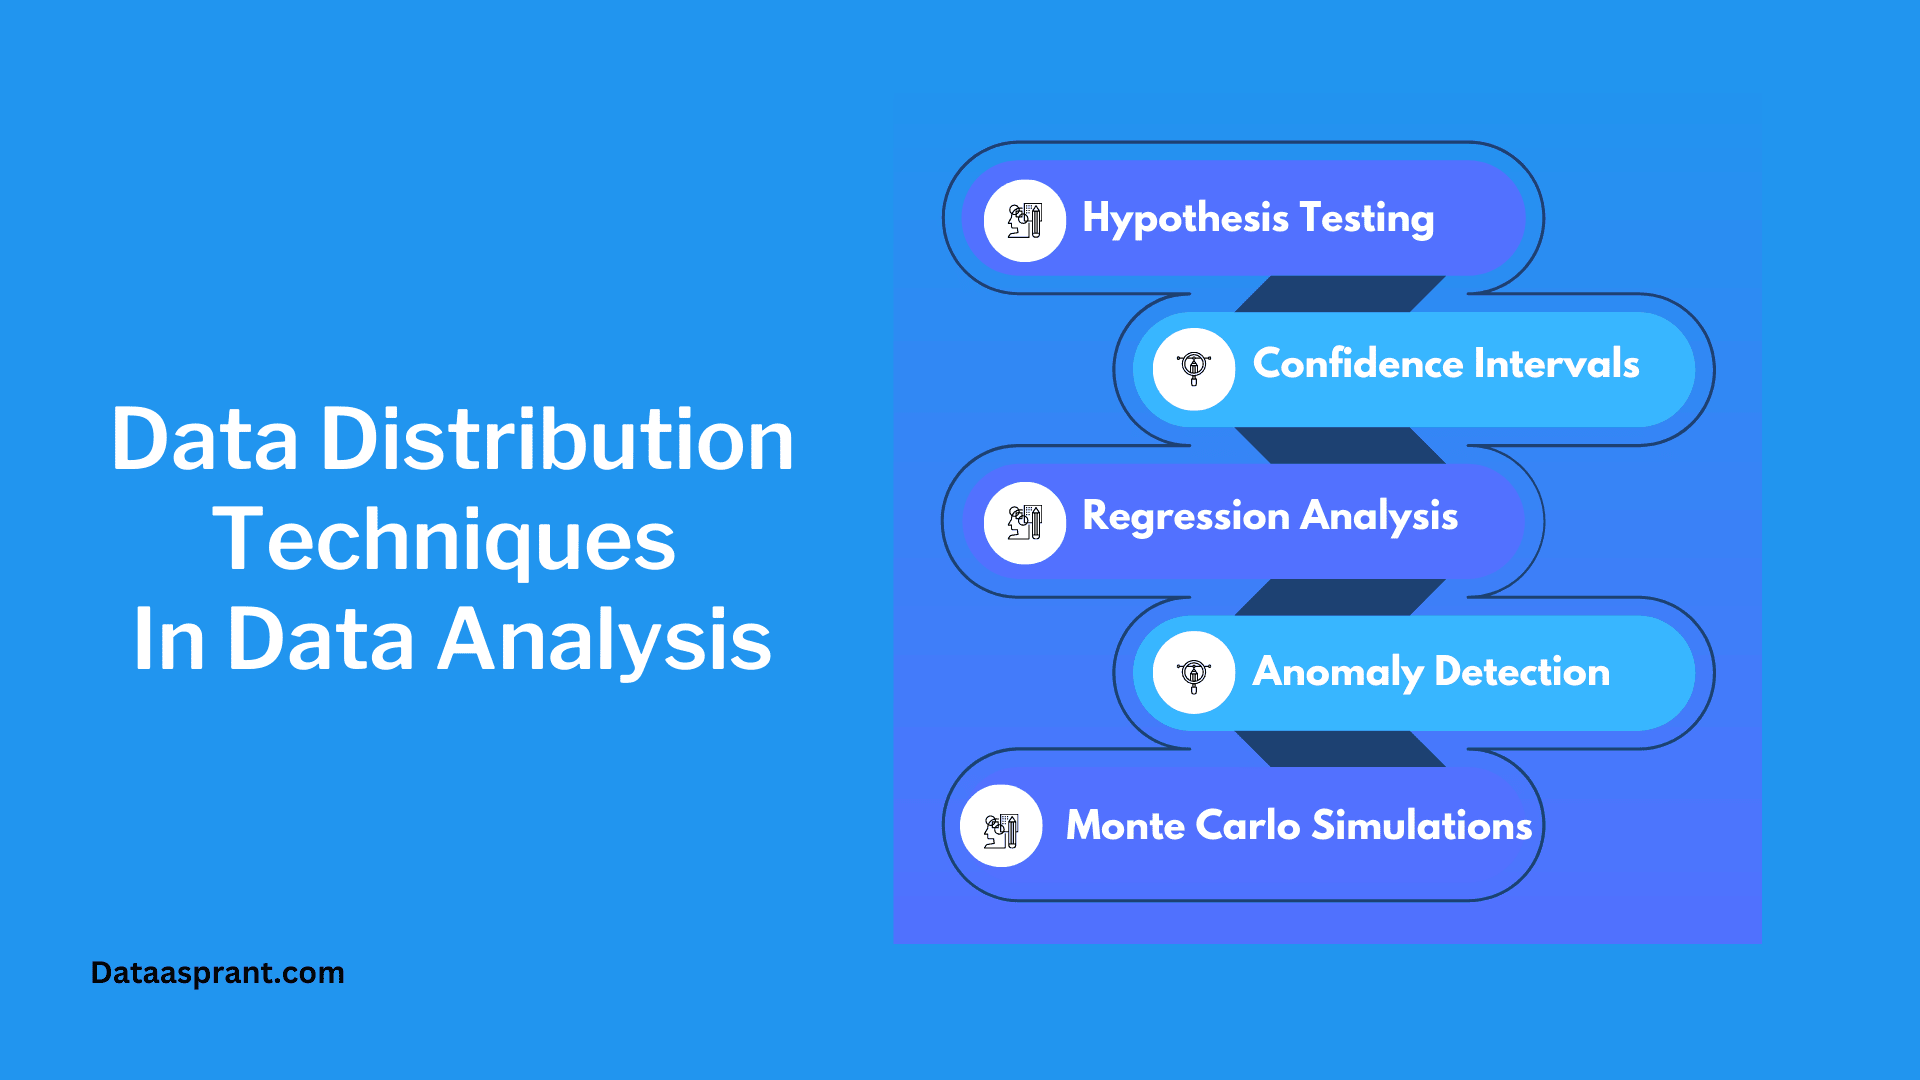 Using Data Distribution Techniques In Data Analysis